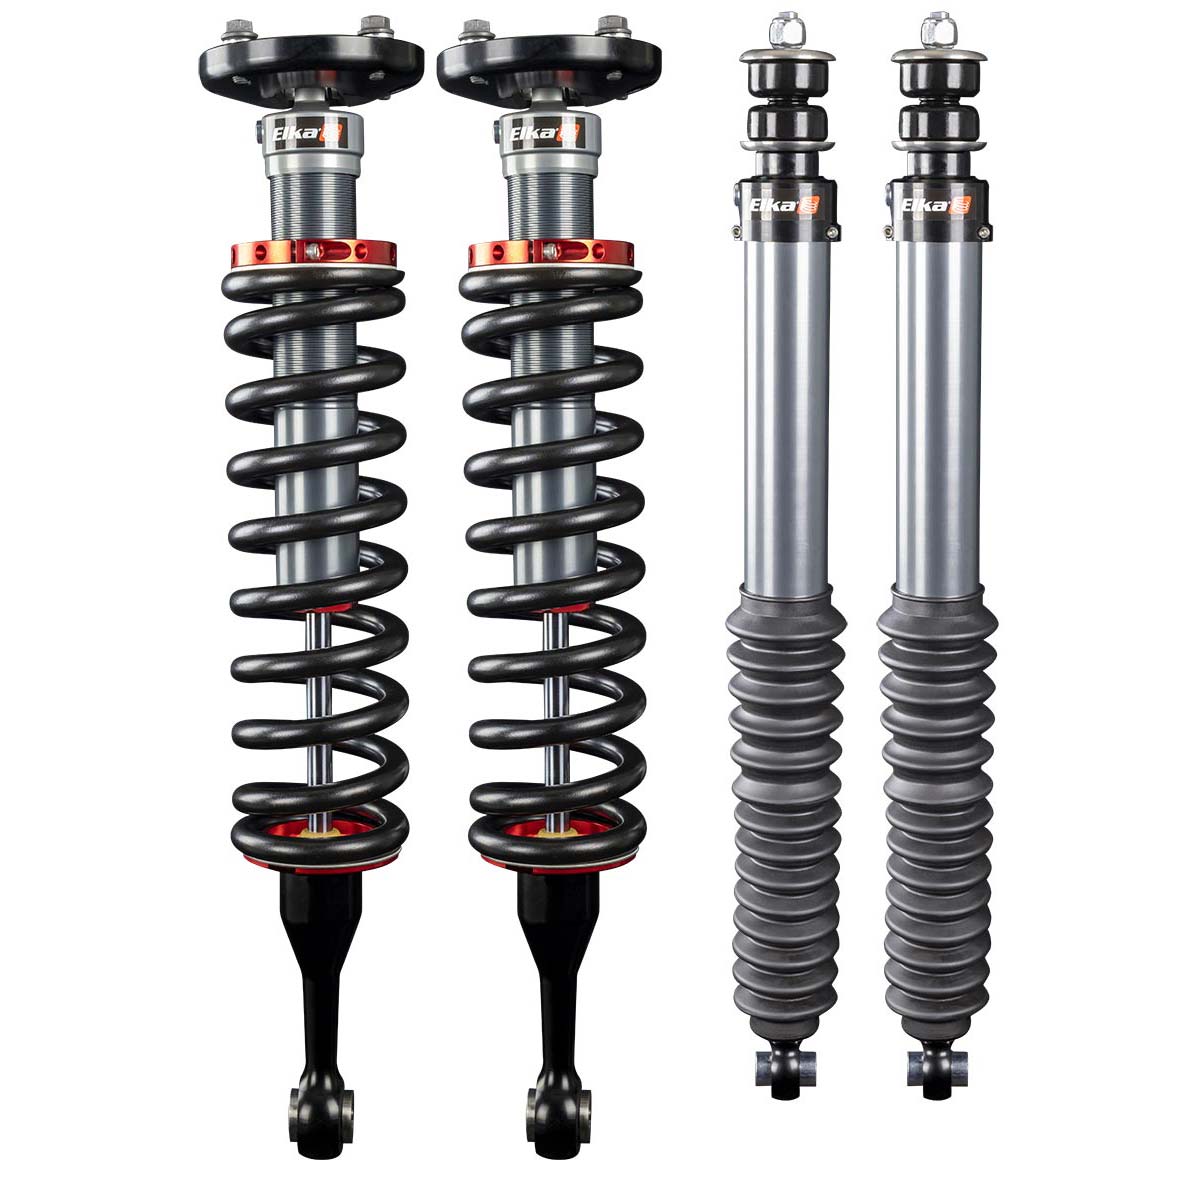 2.0 IFP FRONT & REAR SHOCKS KIT for TOYOTA TUNDRA, 2007 to 2020 (0 in. to 3 in. lift) - RA Motorsports Canada